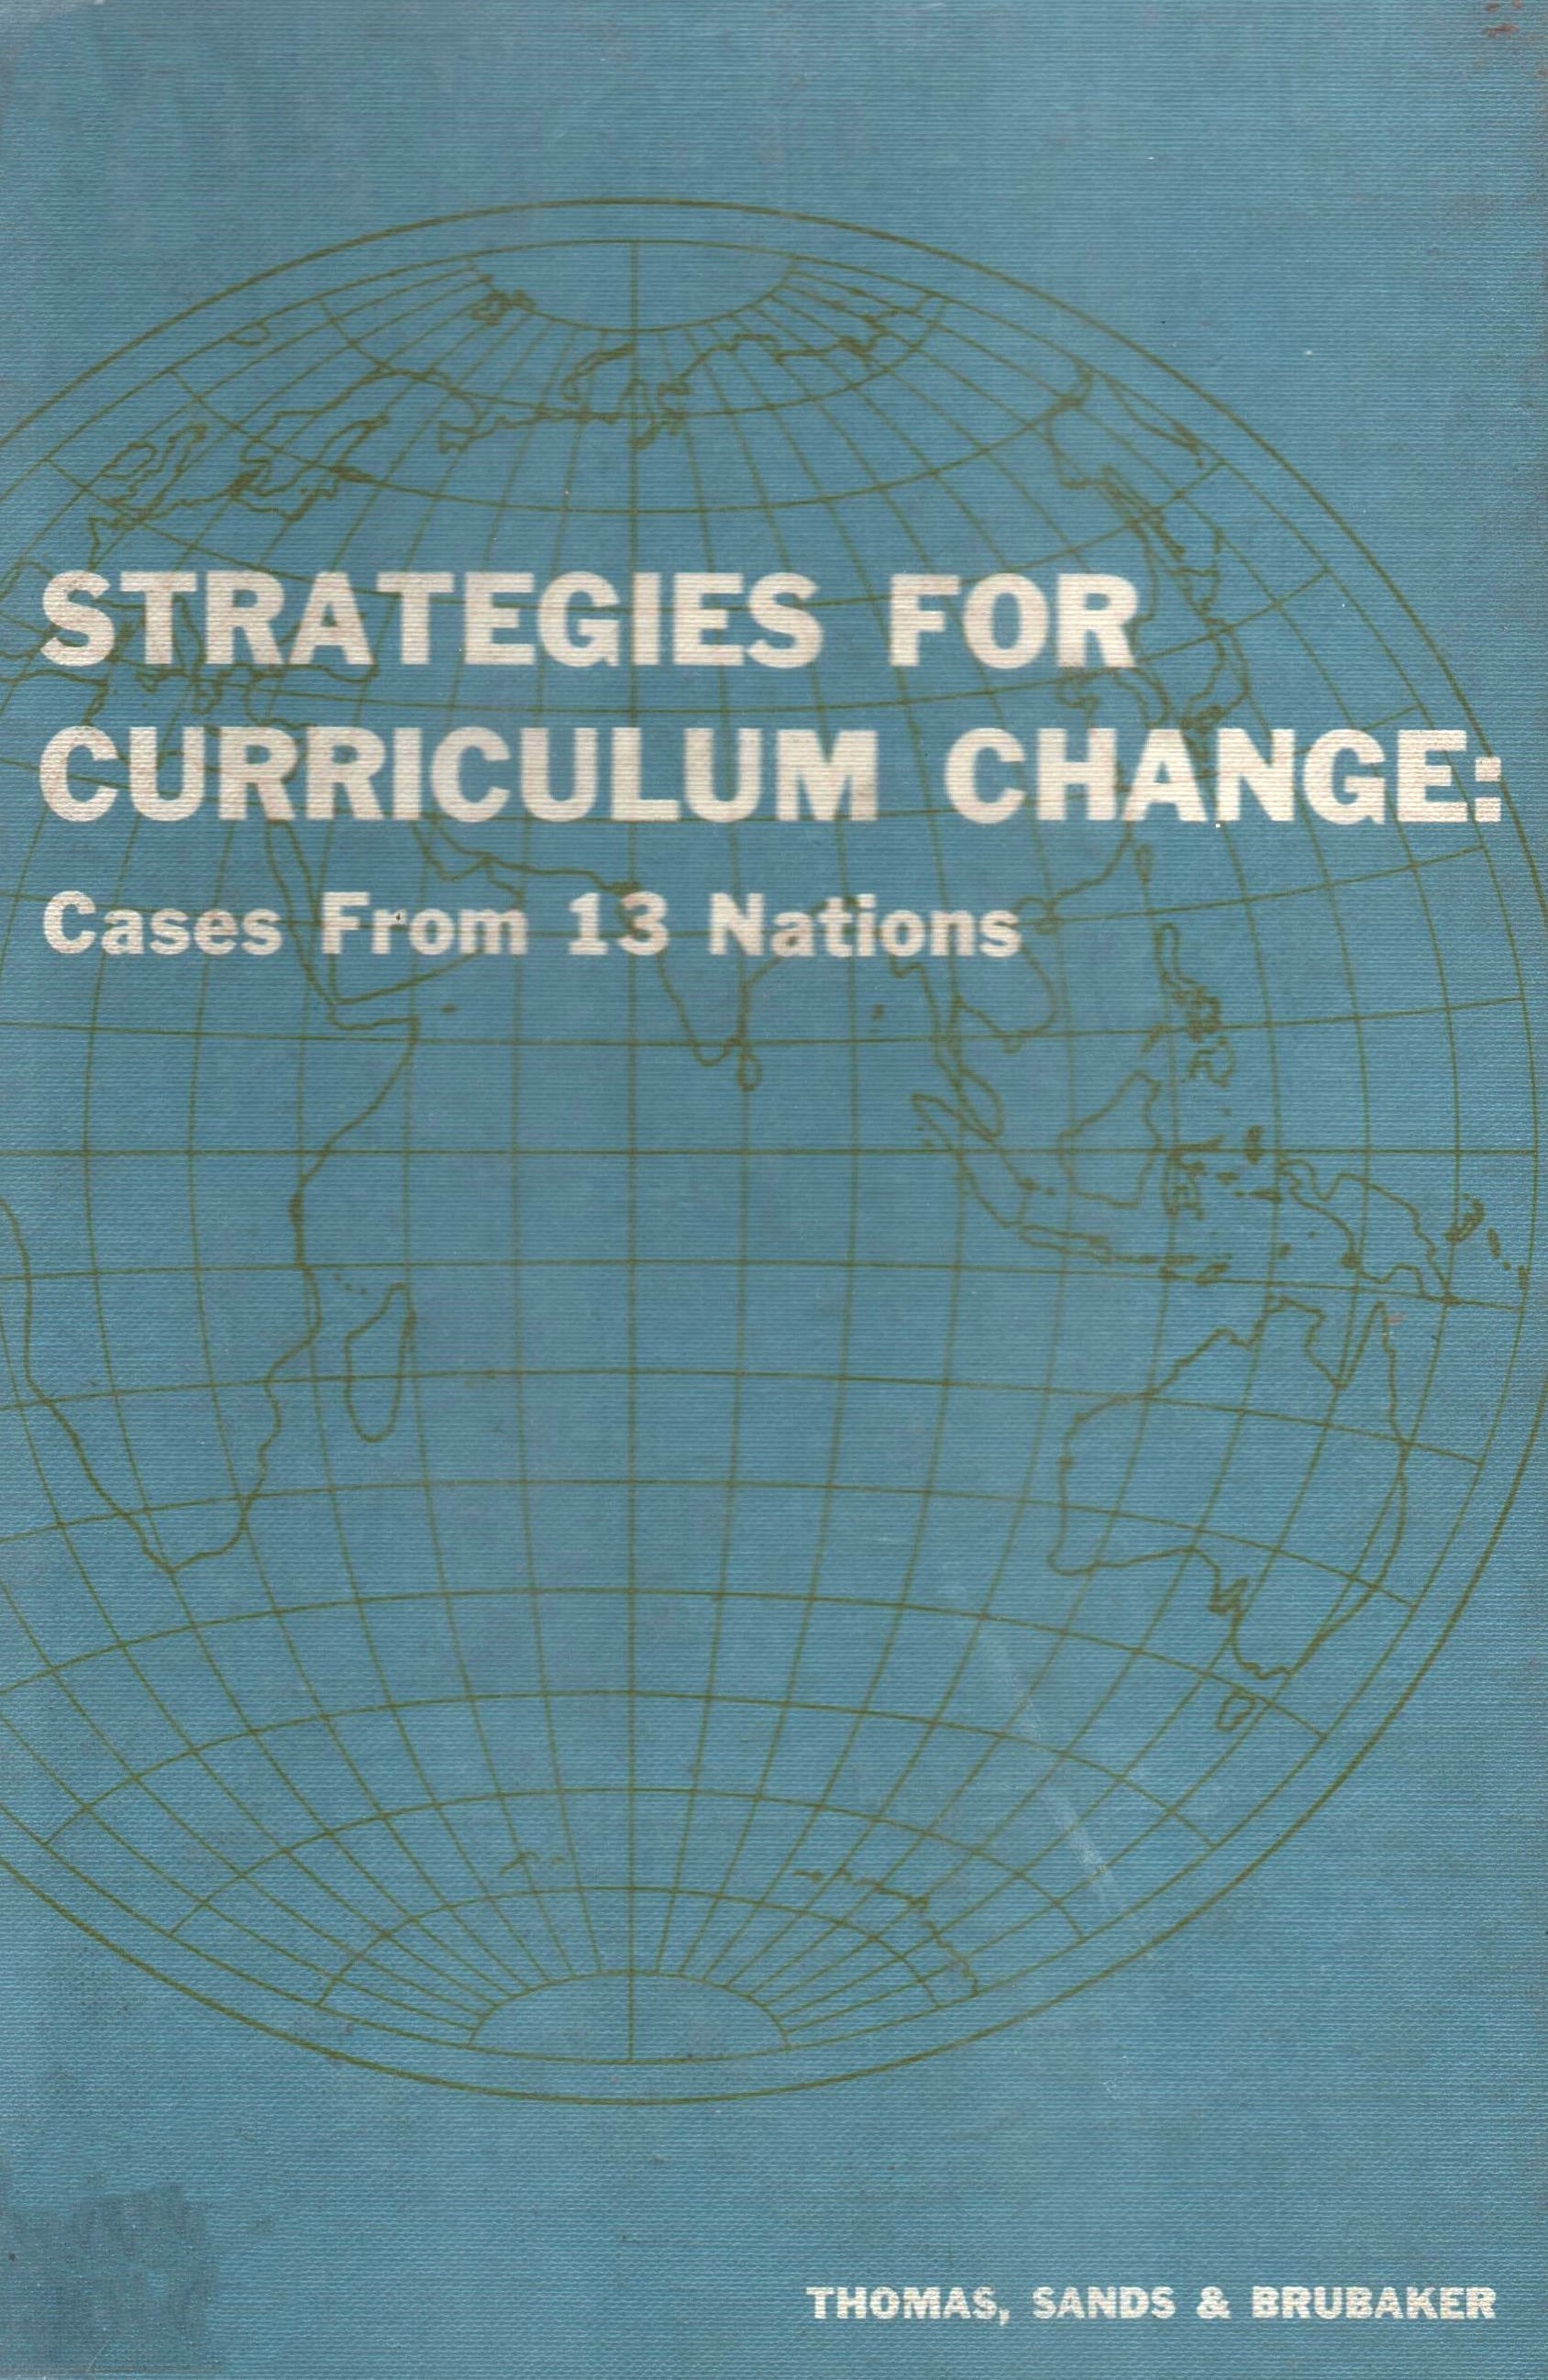 Strategies for curriculum change cases from 13 nations